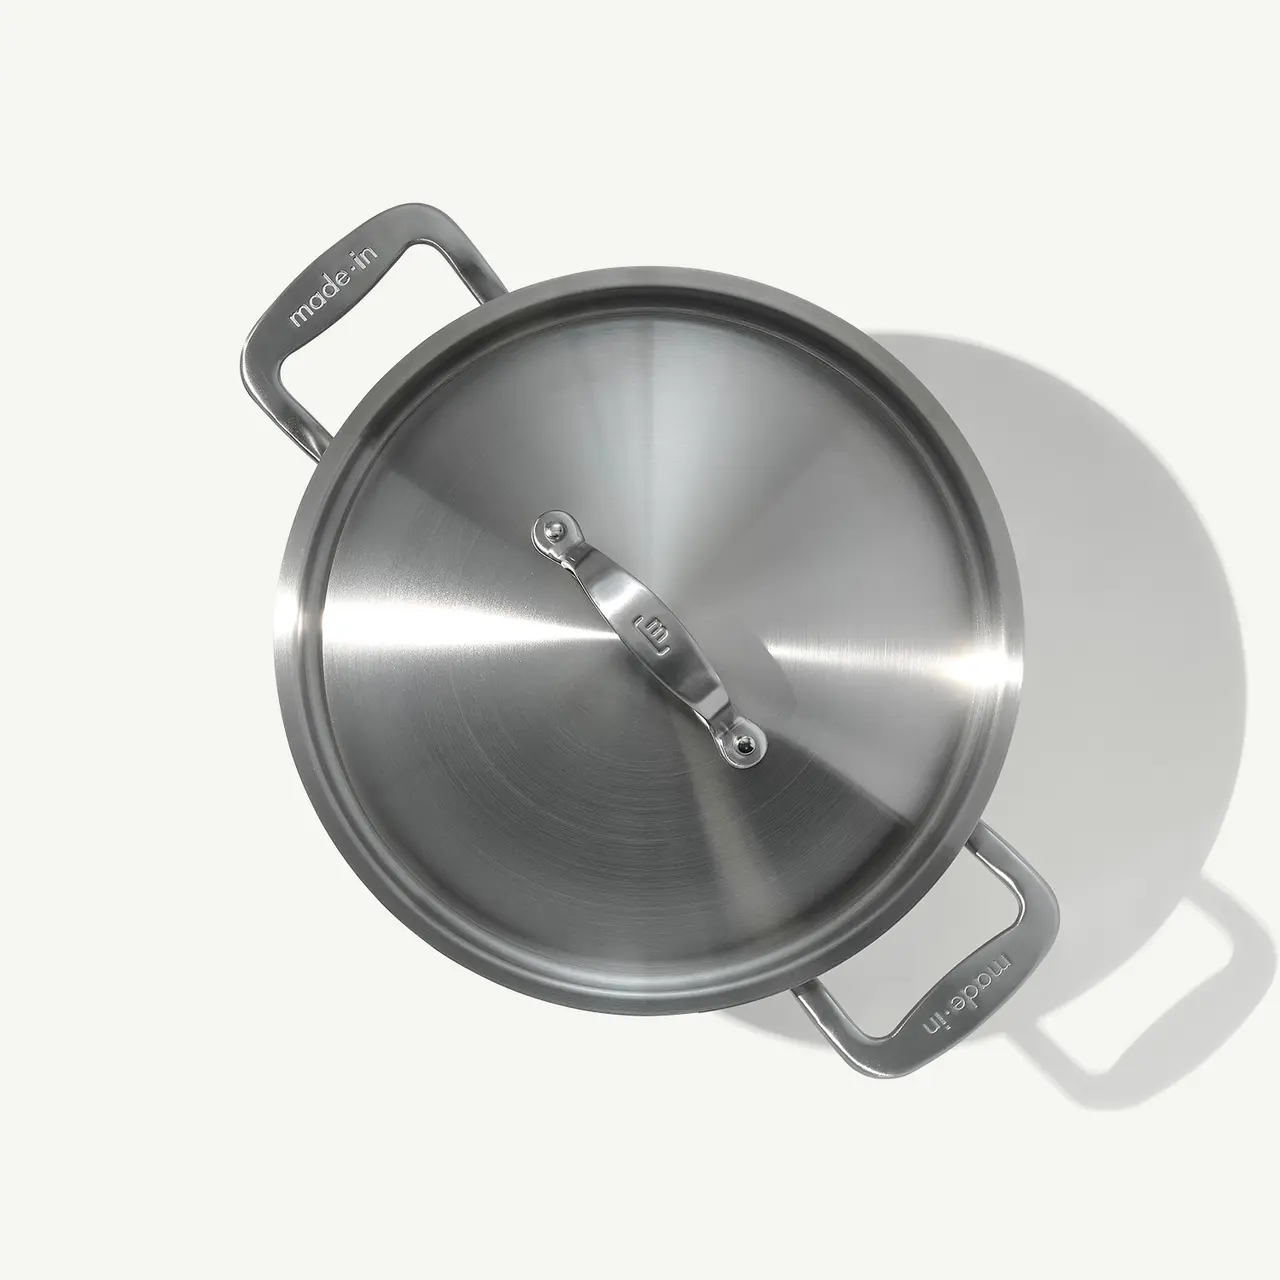 A stainless steel pot with handles and a lid casting a shadow on a light surface.